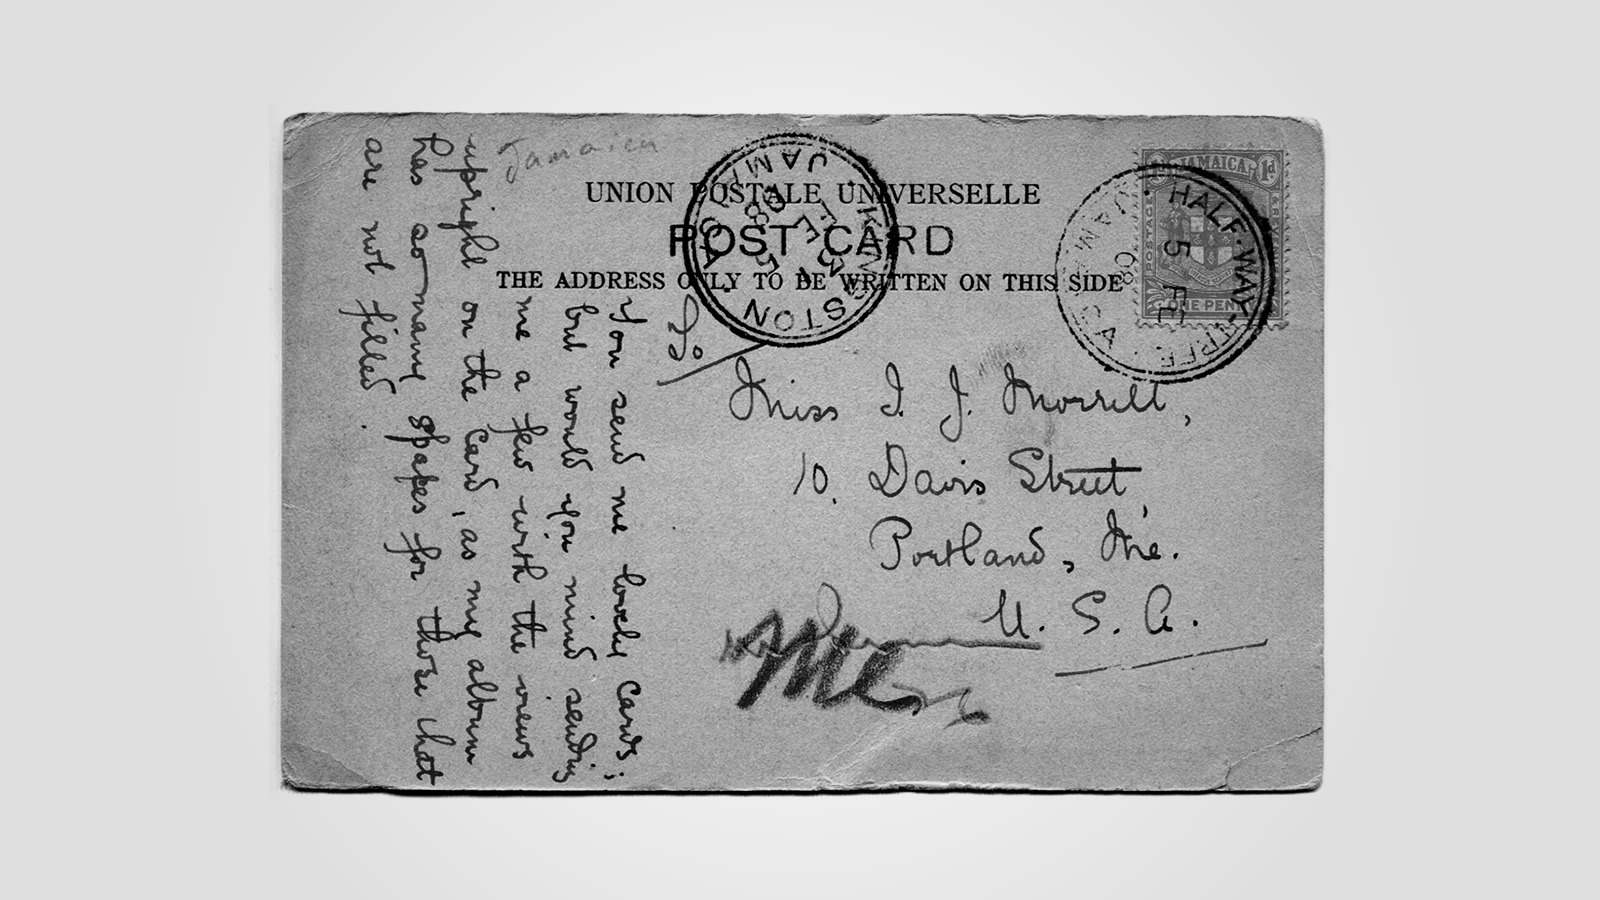 The inscribed, postmarked reverse of an old postcard